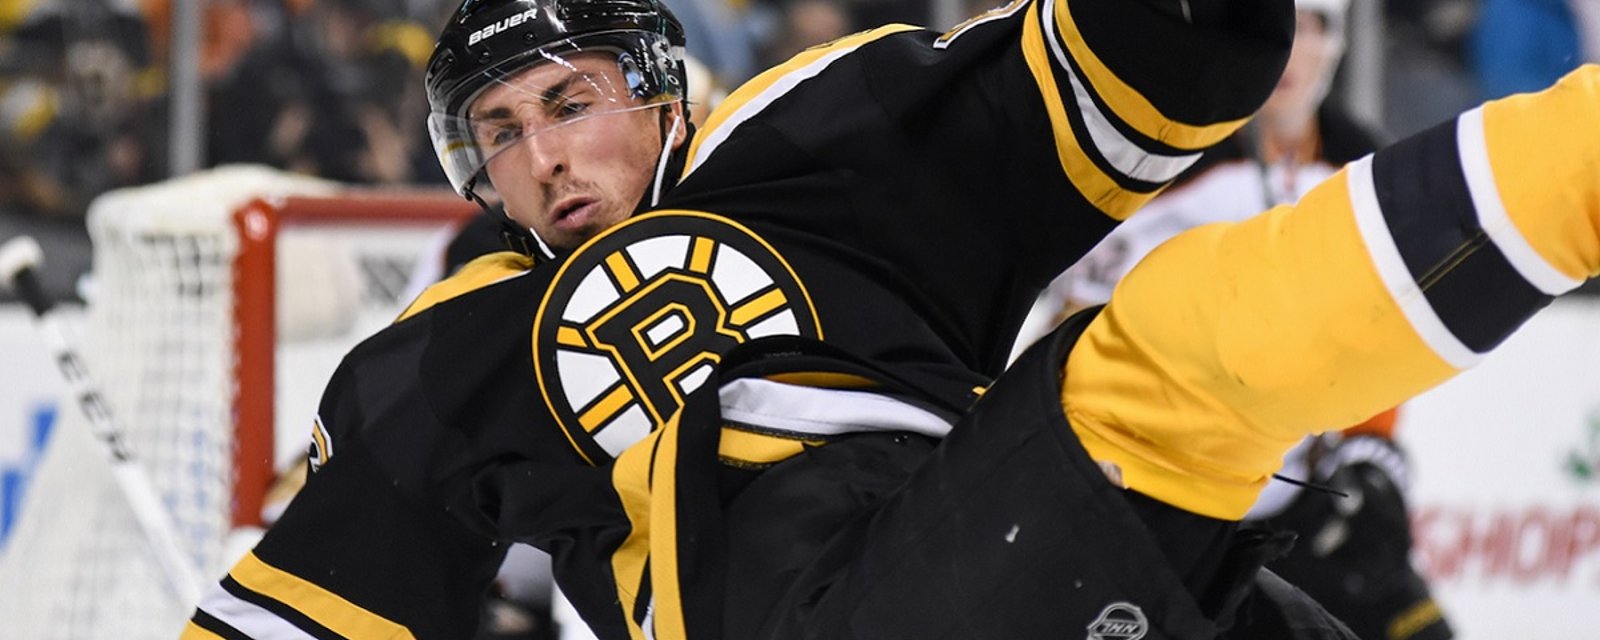 Bruins update the status of Marchand &amp;amp; Bjork, bad news in both cases.